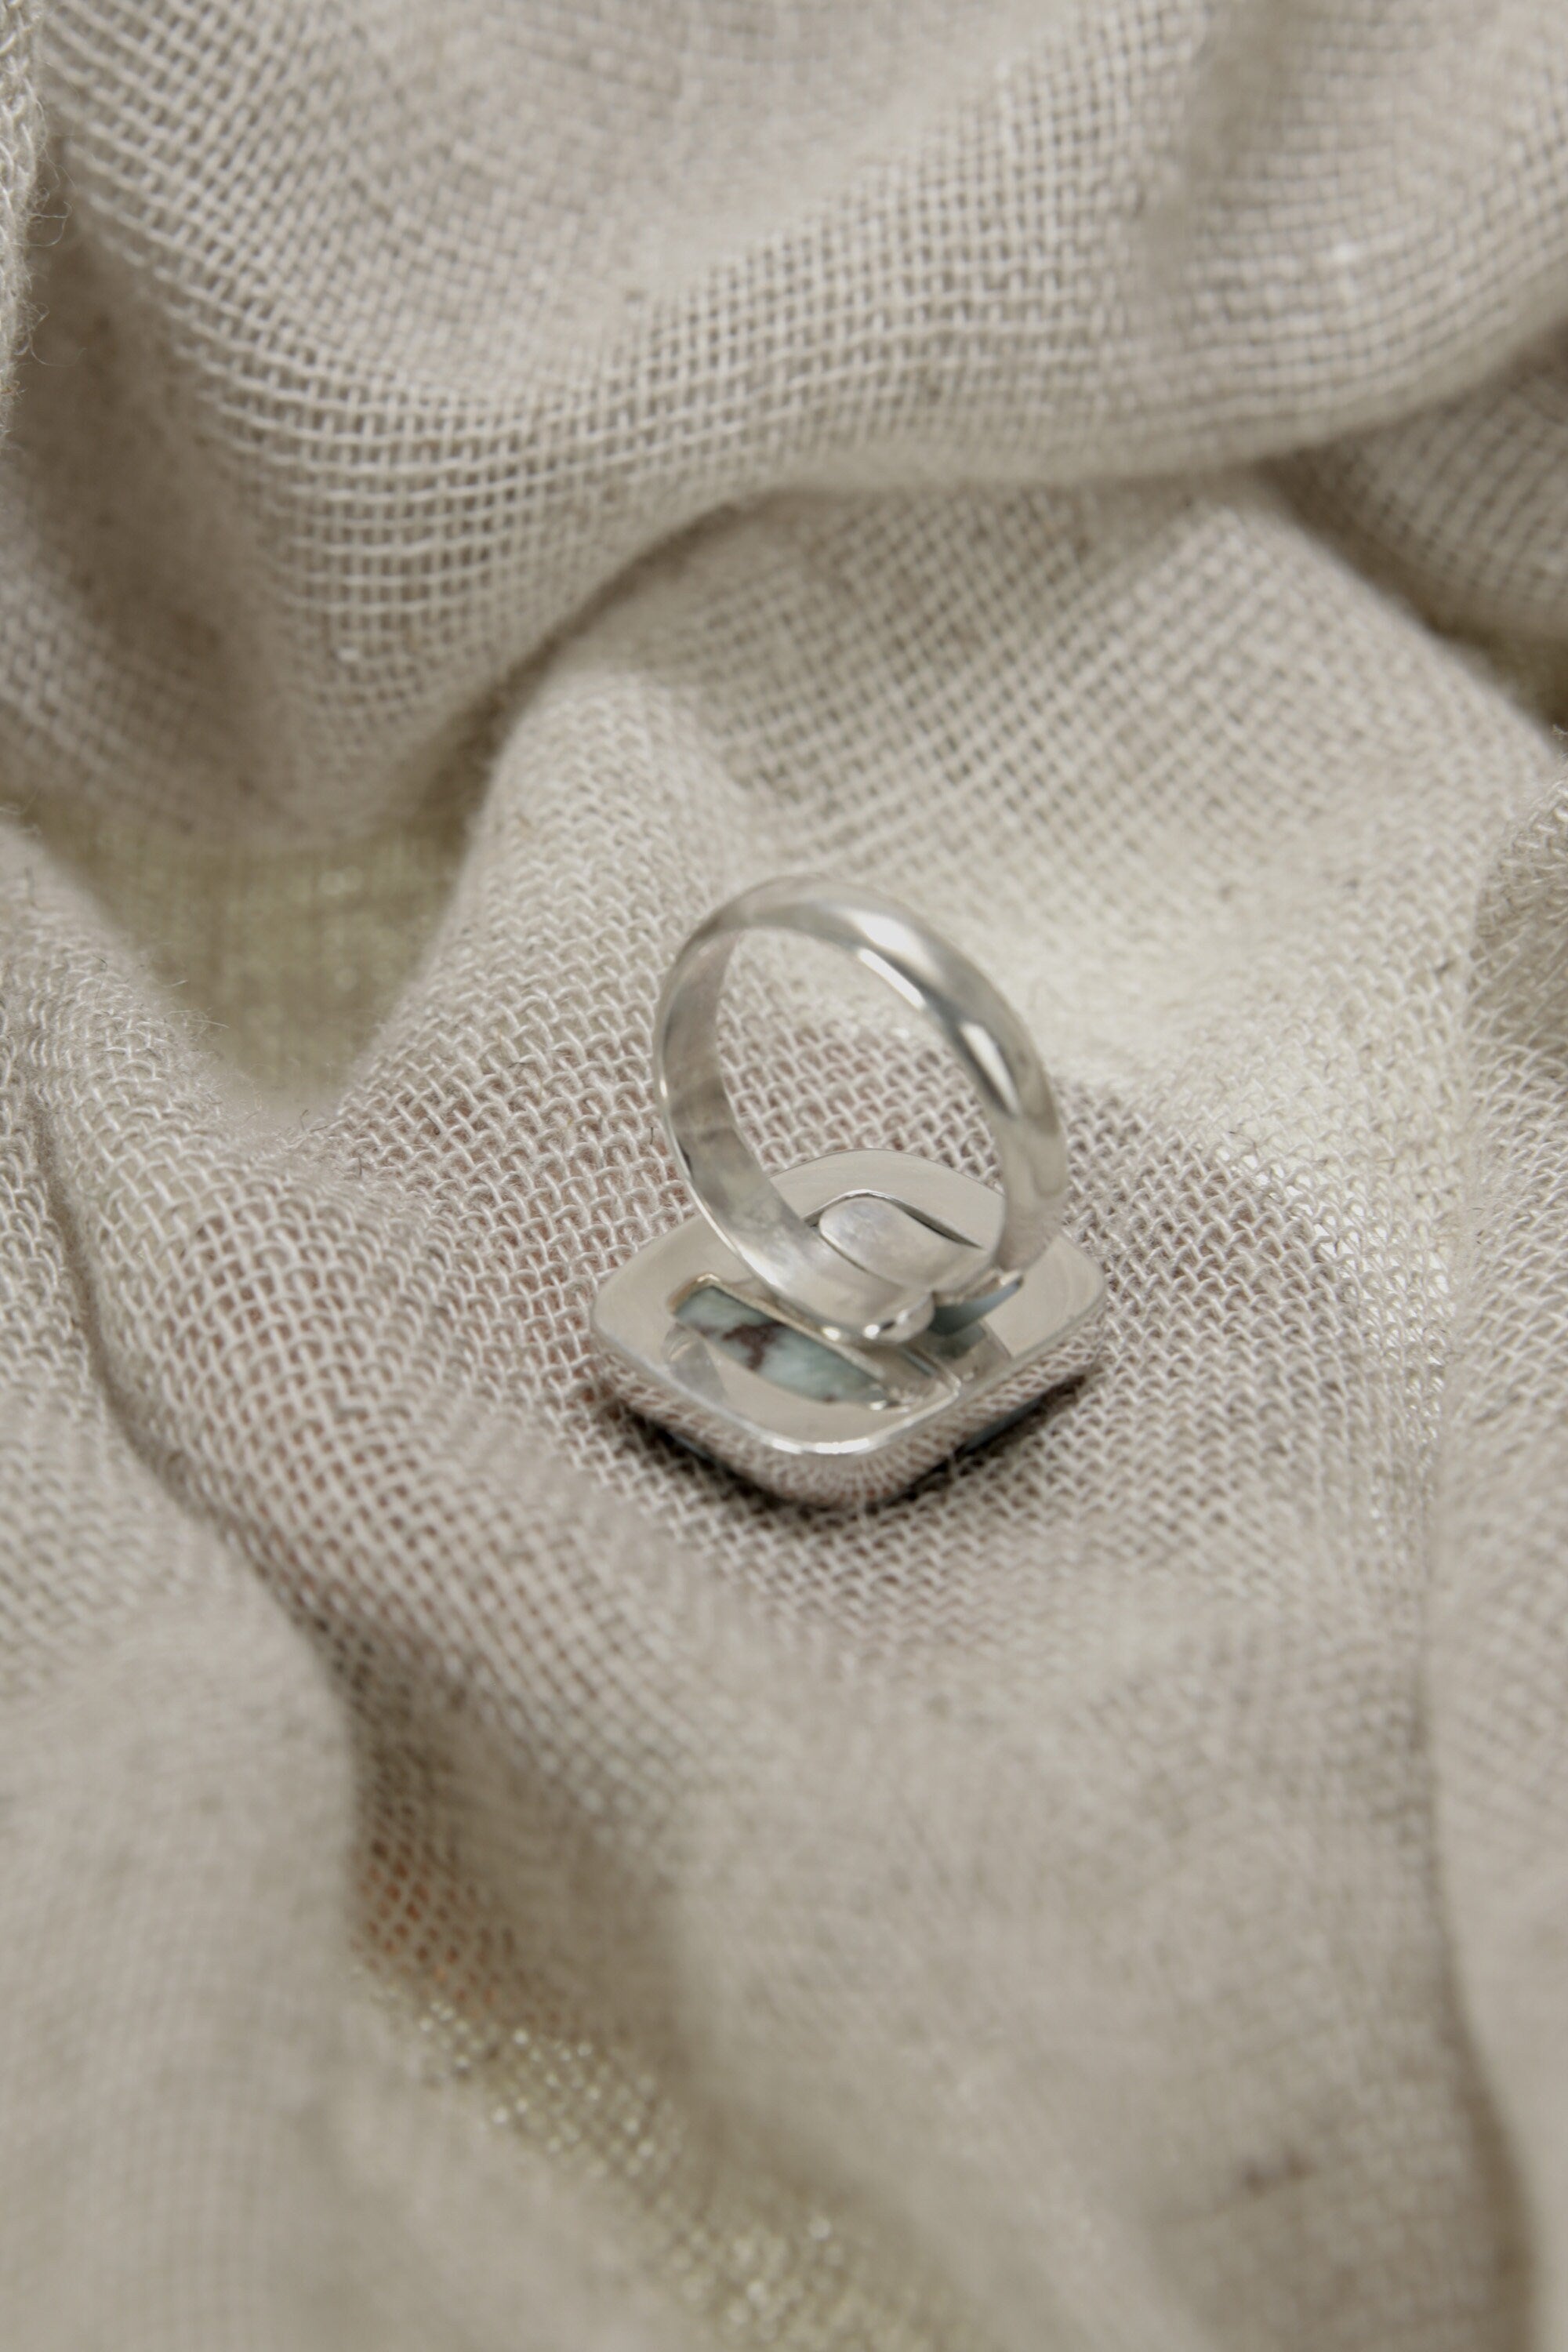 Ocean's Embrace: Adjustable Sterling Silver Ring with Larimar - Unisex - Size 5-12 US